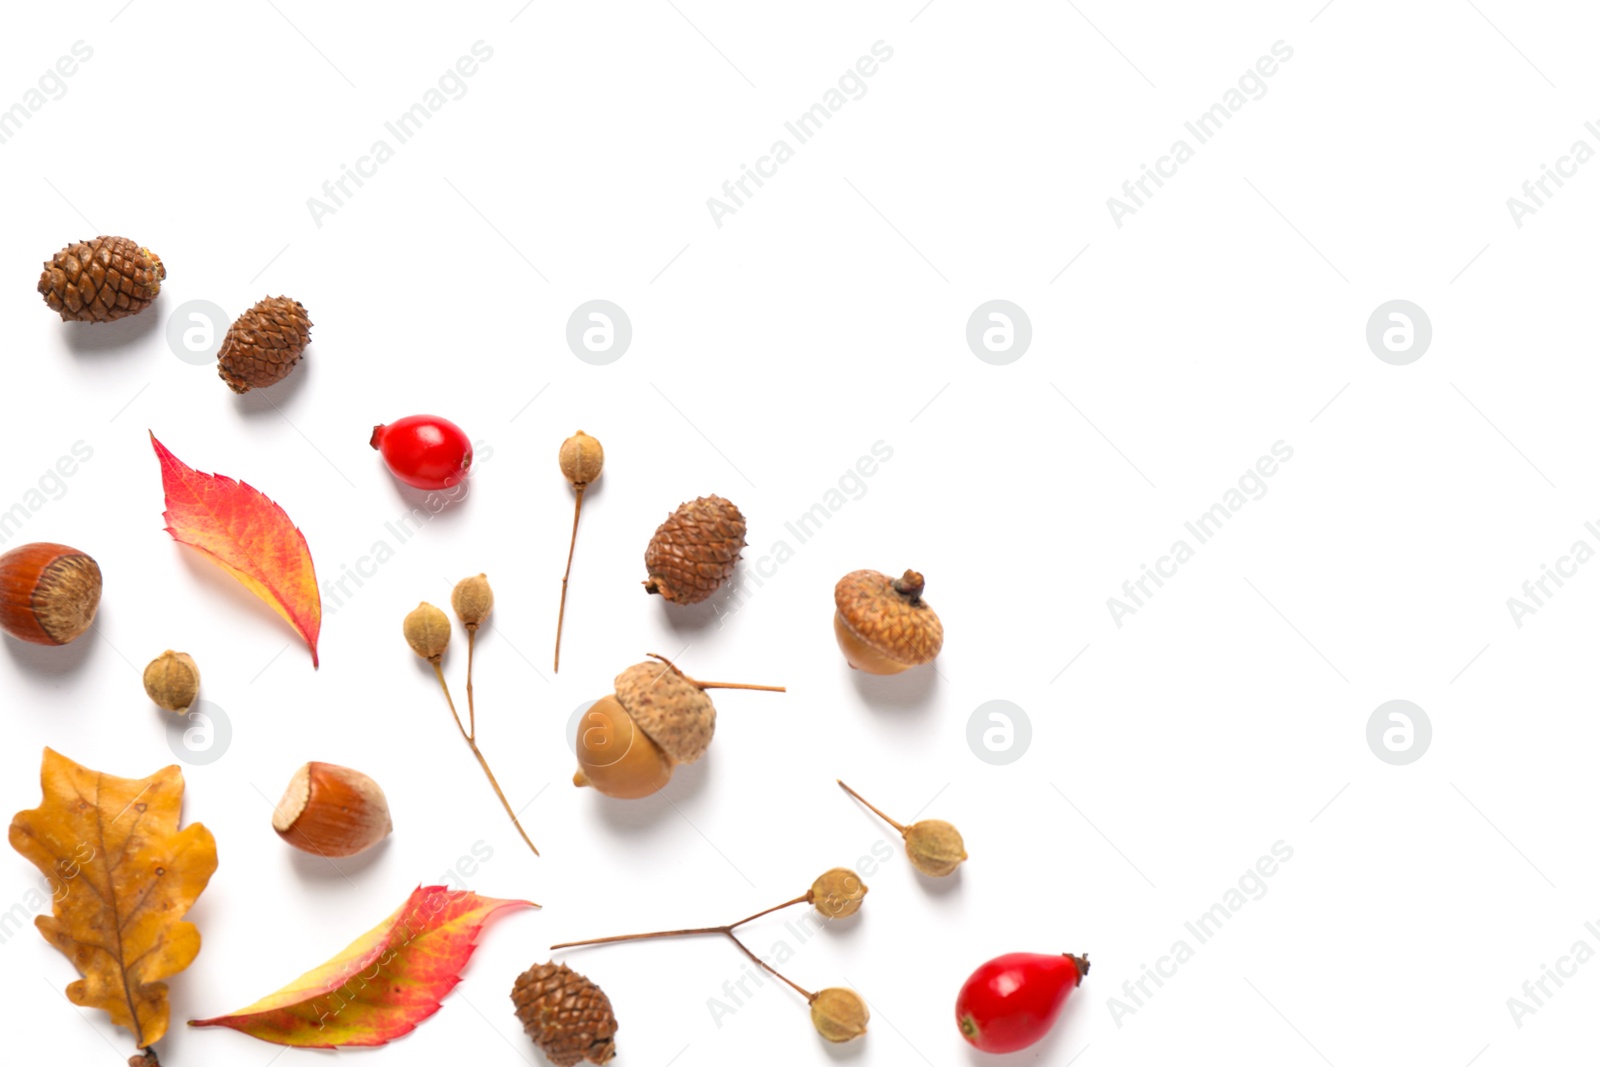 Photo of Beautiful composition with autumn leaves on white background, flat lay. Space for text